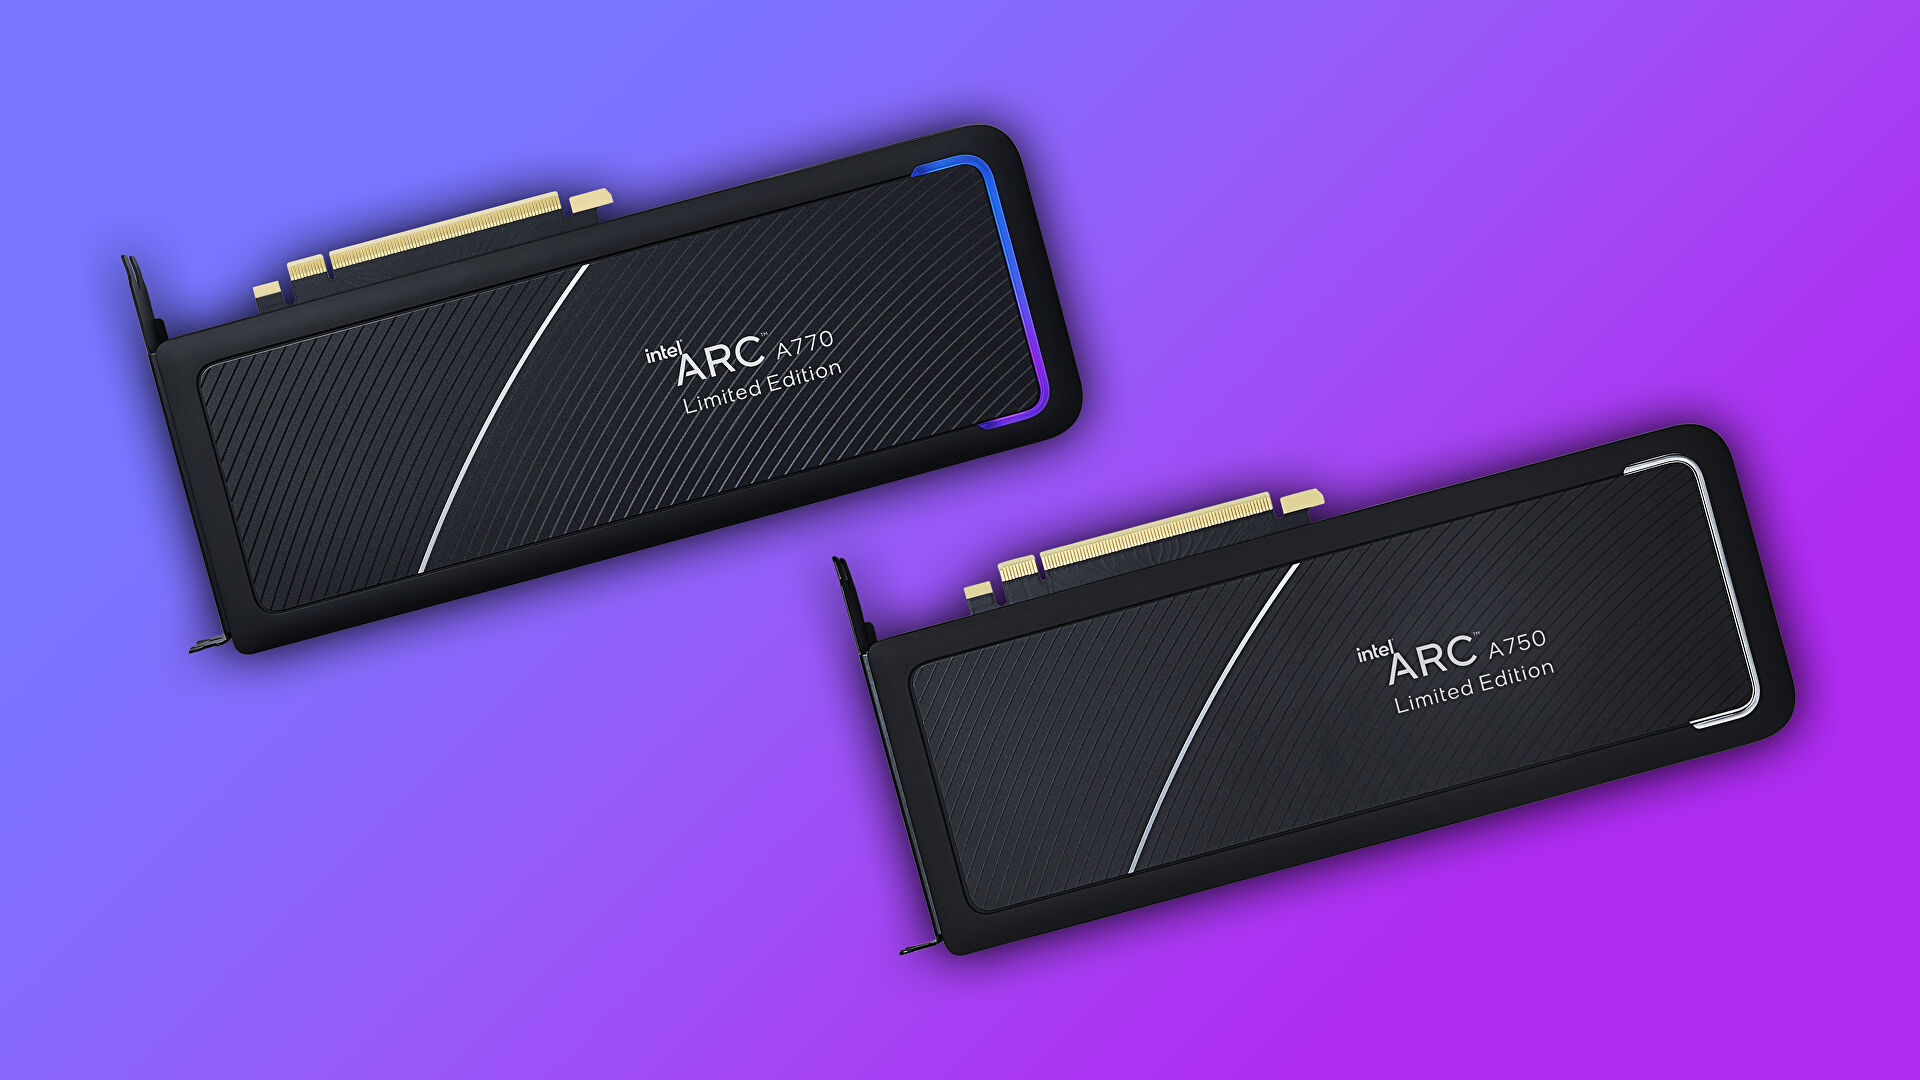 Intel’s Arc A750 graphics card is back in stock at Newegg